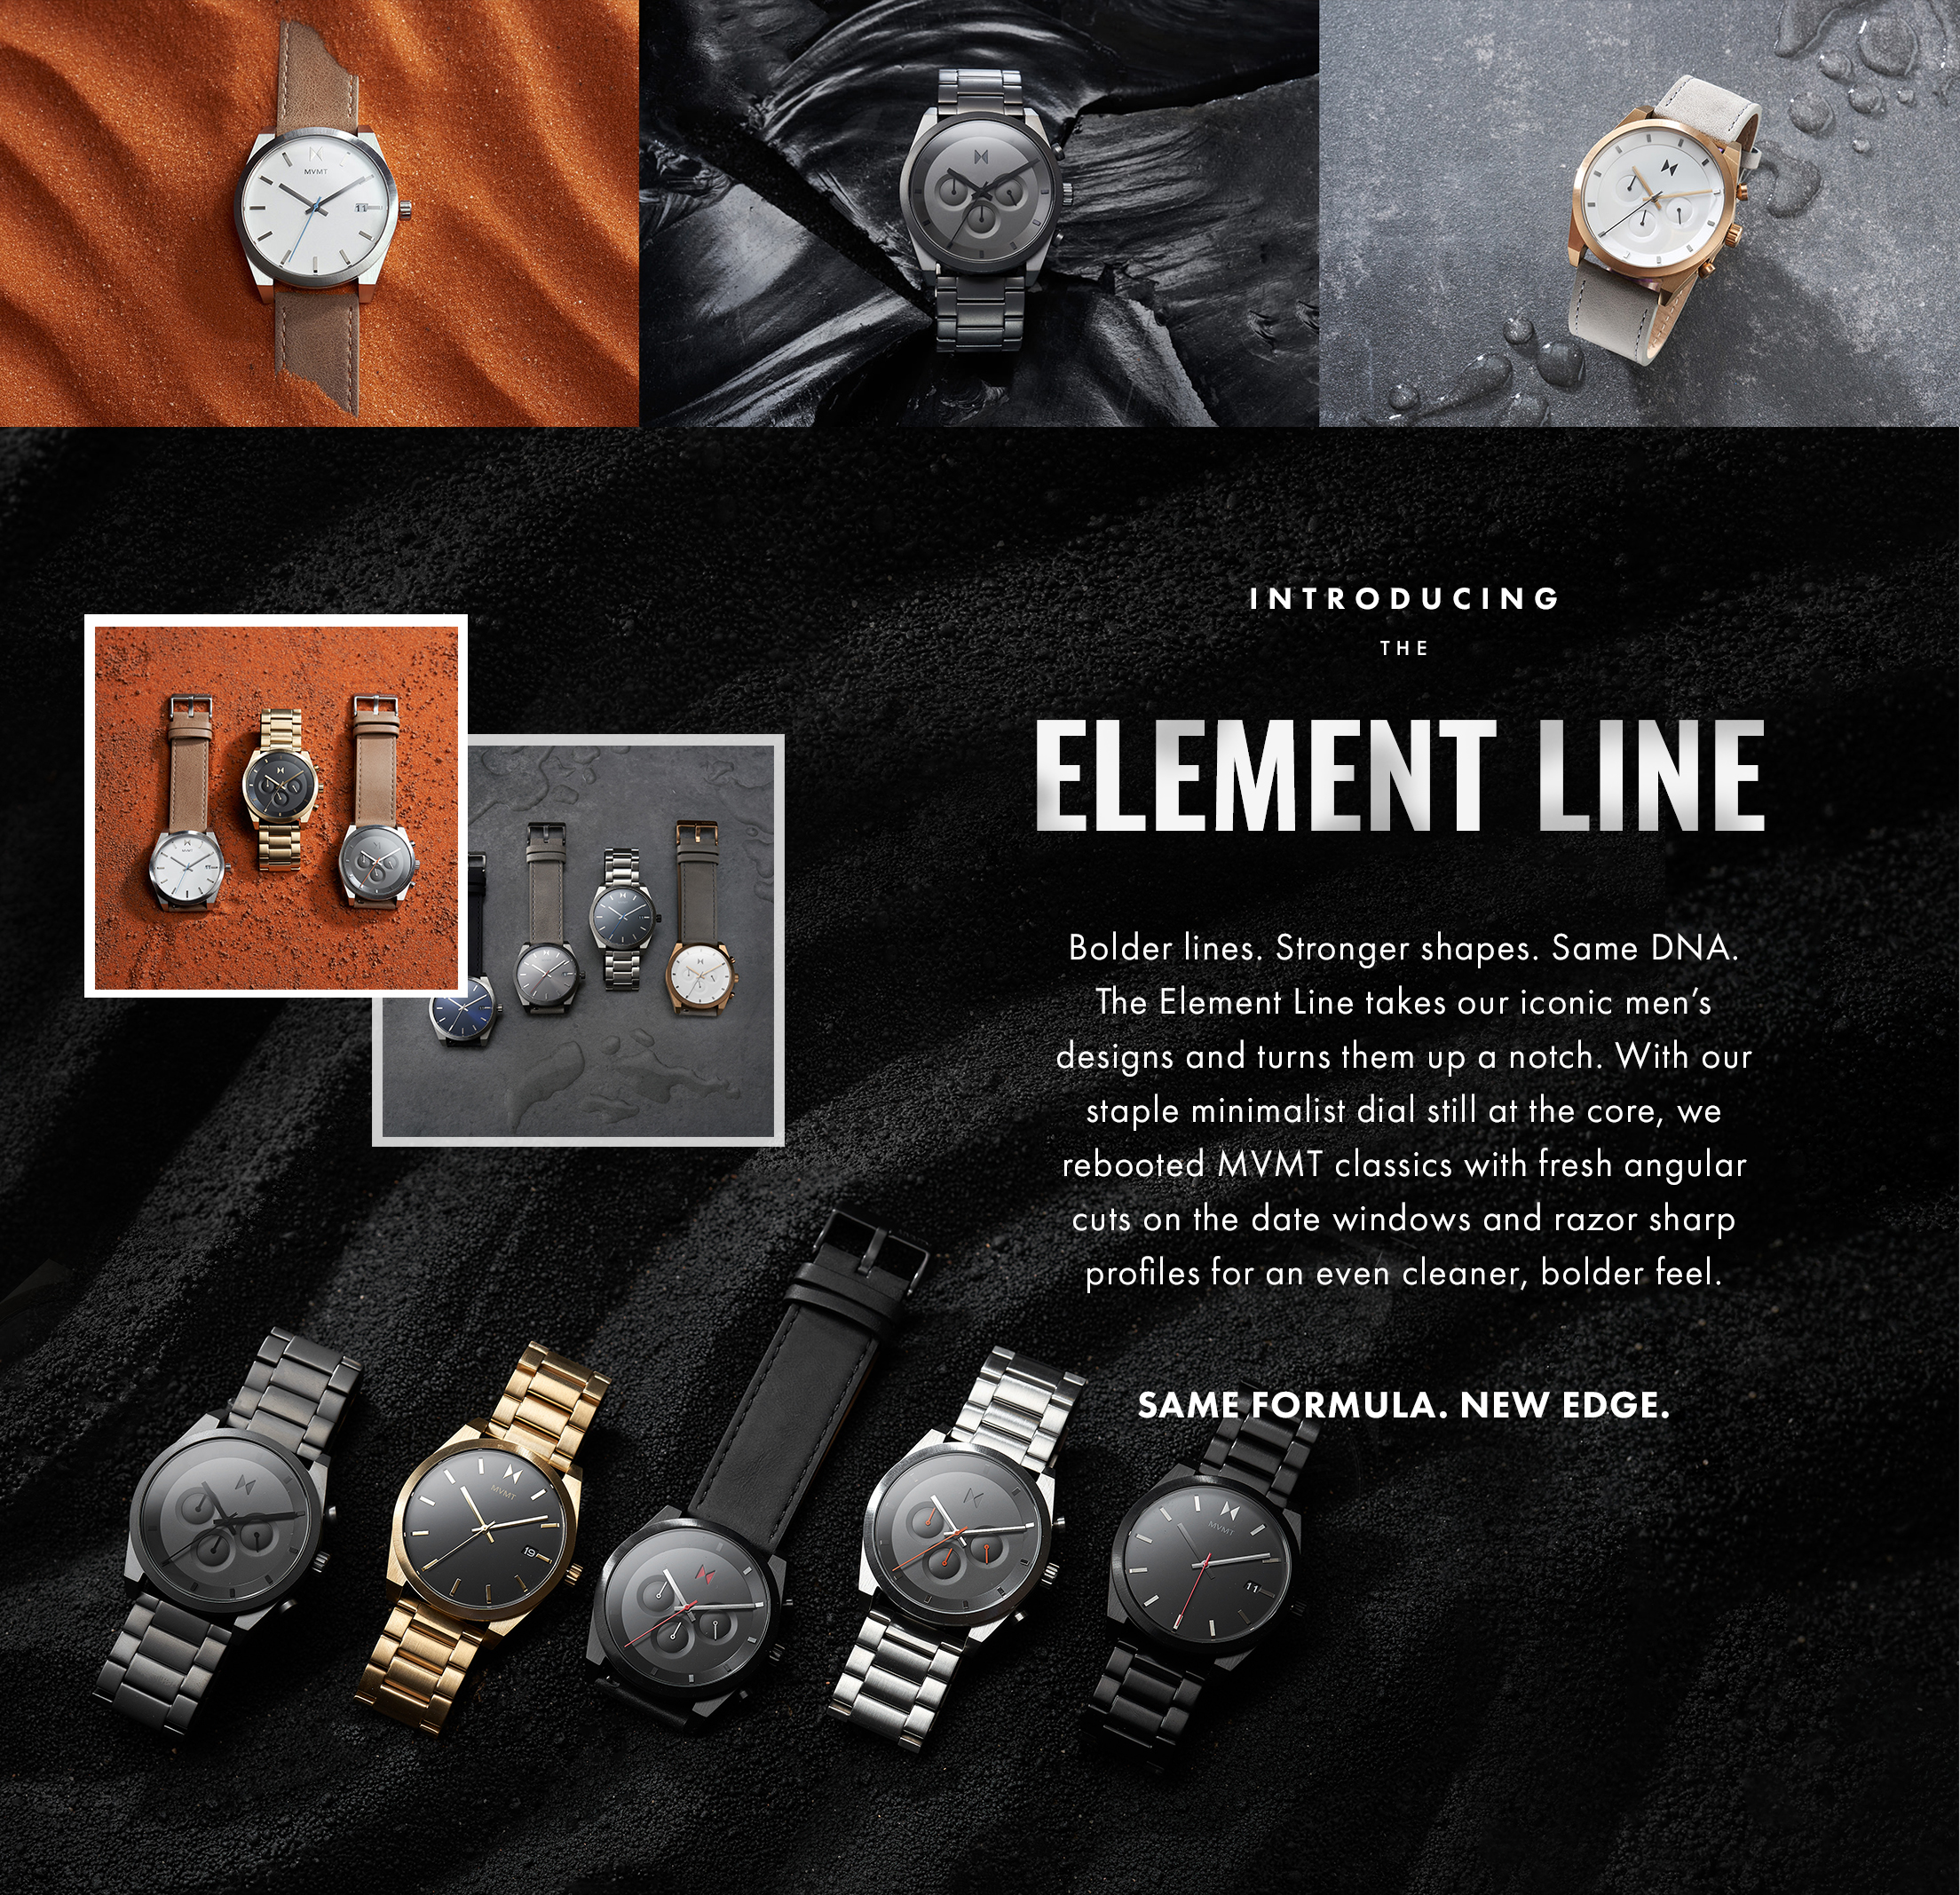 Introducing the Element line. Bolder lines. Stronger shapes. Same DNA. The Element Line takes our iconic men's designs and turns them up a notch. With our staple minimalist dial still at the core, we rebooted MVMT classics with fresh angular cuts on the date windows and razor sharp profiles for an even cleaner, bolder feel. Same formula. New edge.